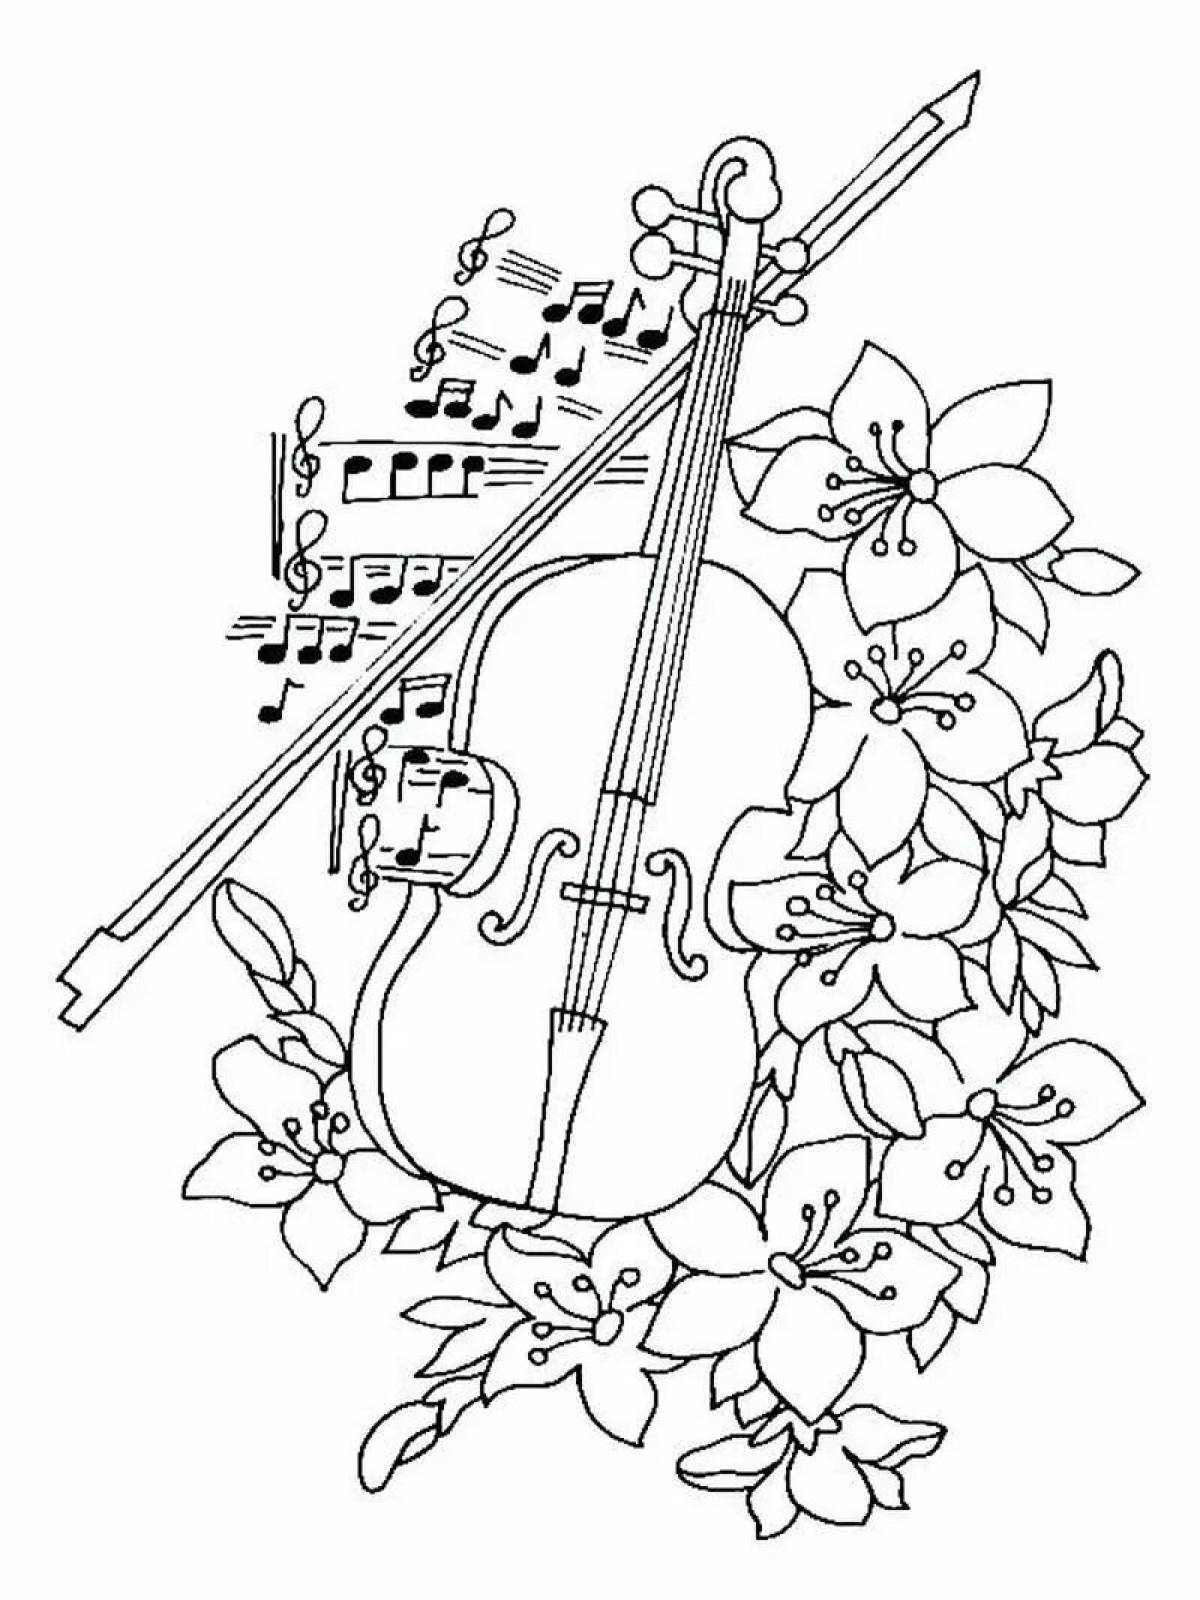 Shining violin coloring book for beginners